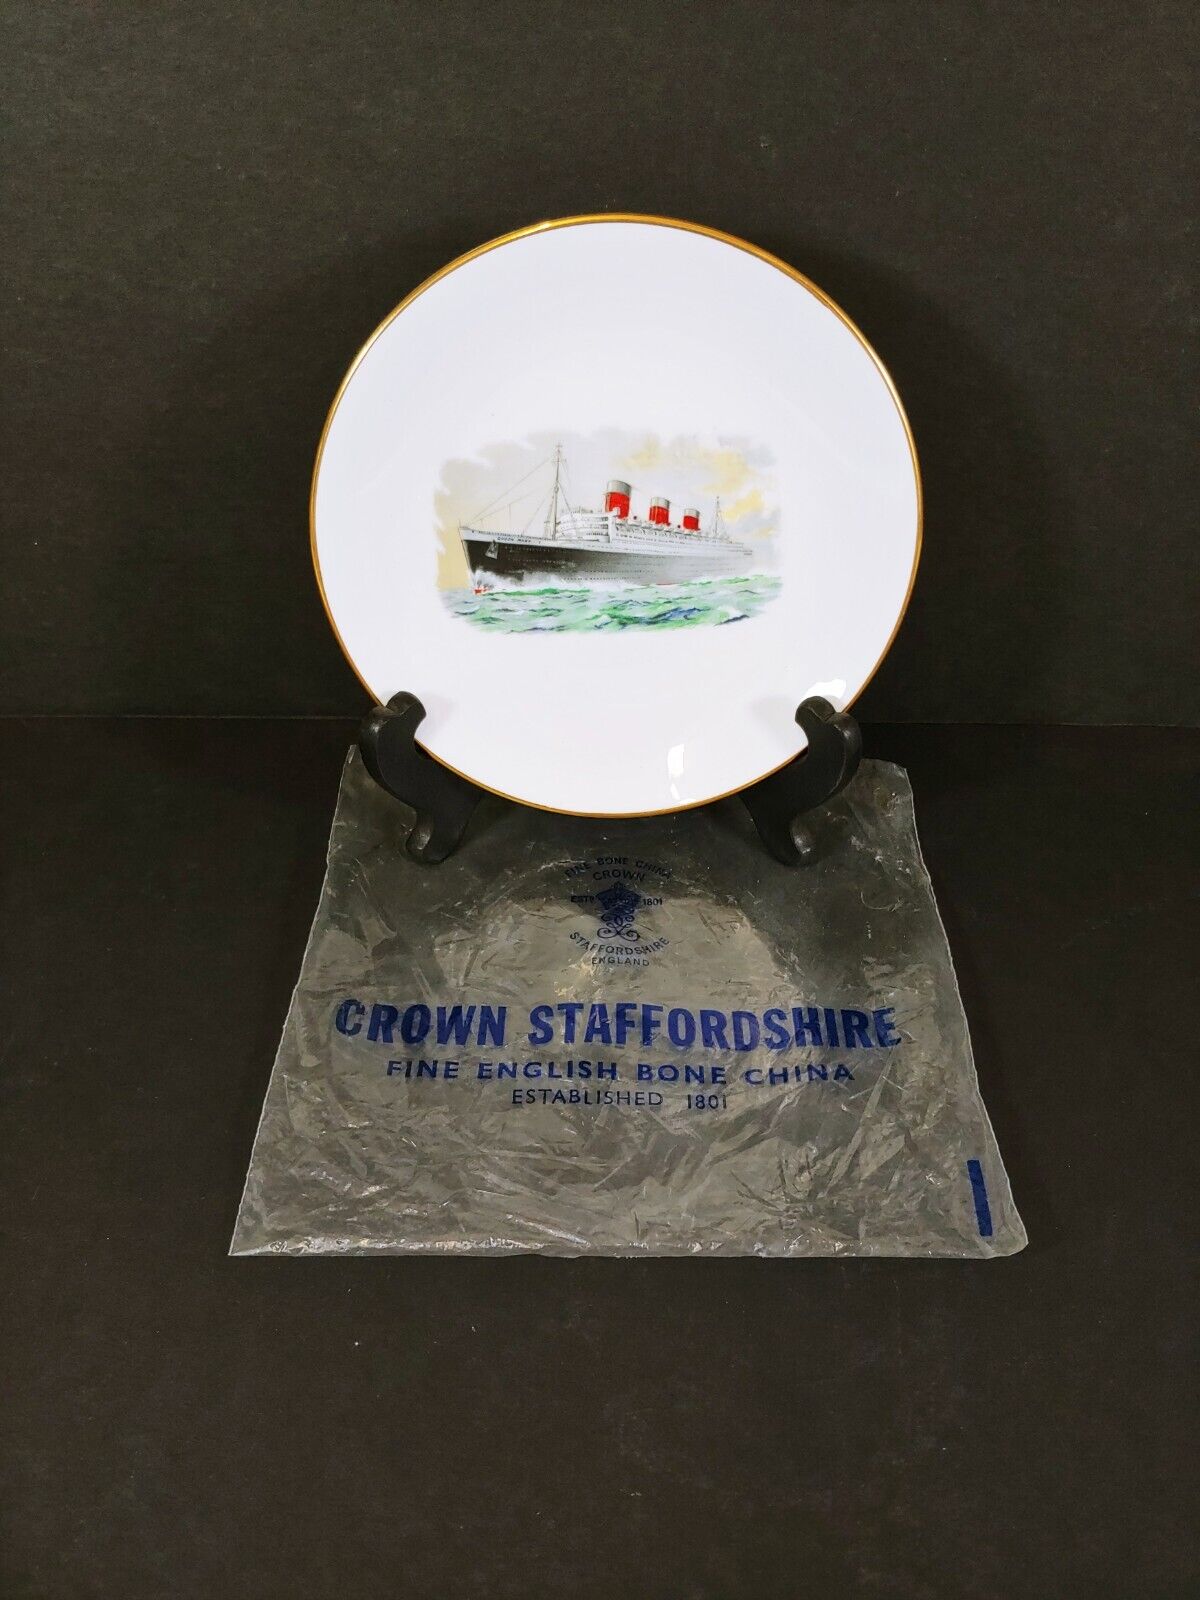 RMS Queen Mary Cunard White Star Line SOUVENIR PLATE by CROWN STAFFORDSHIRE NOS